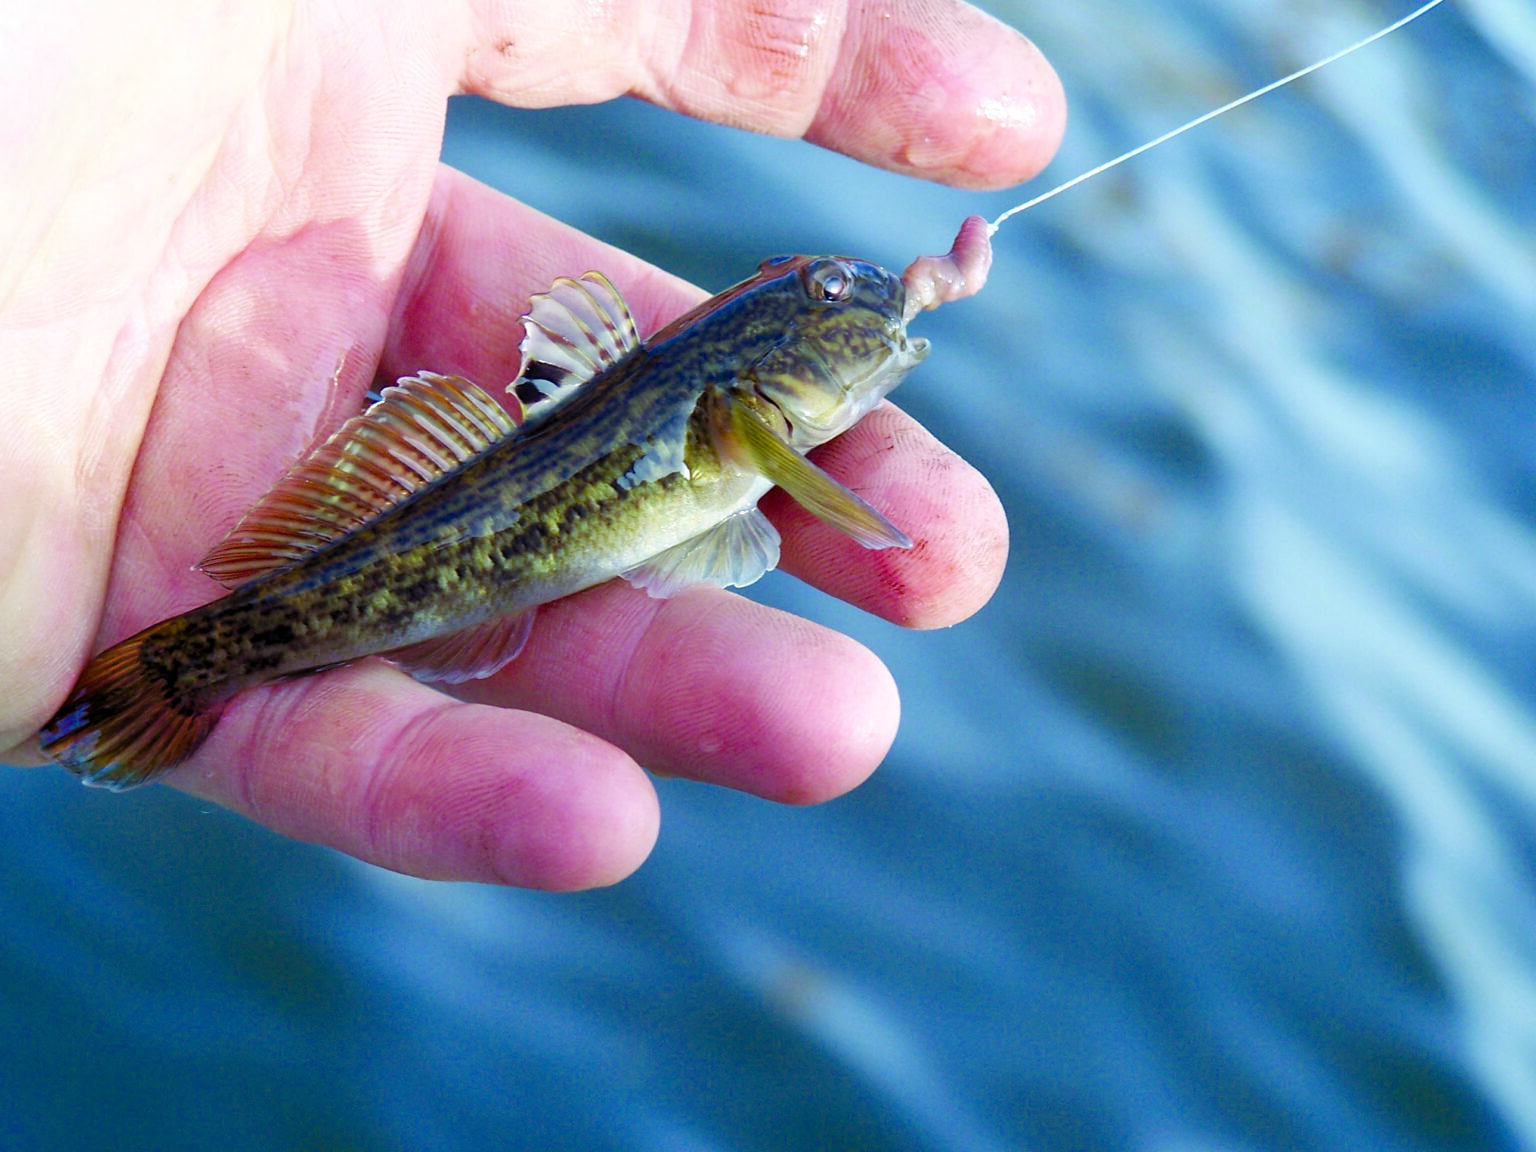 A hand holding a round goby fish, an invasive species.